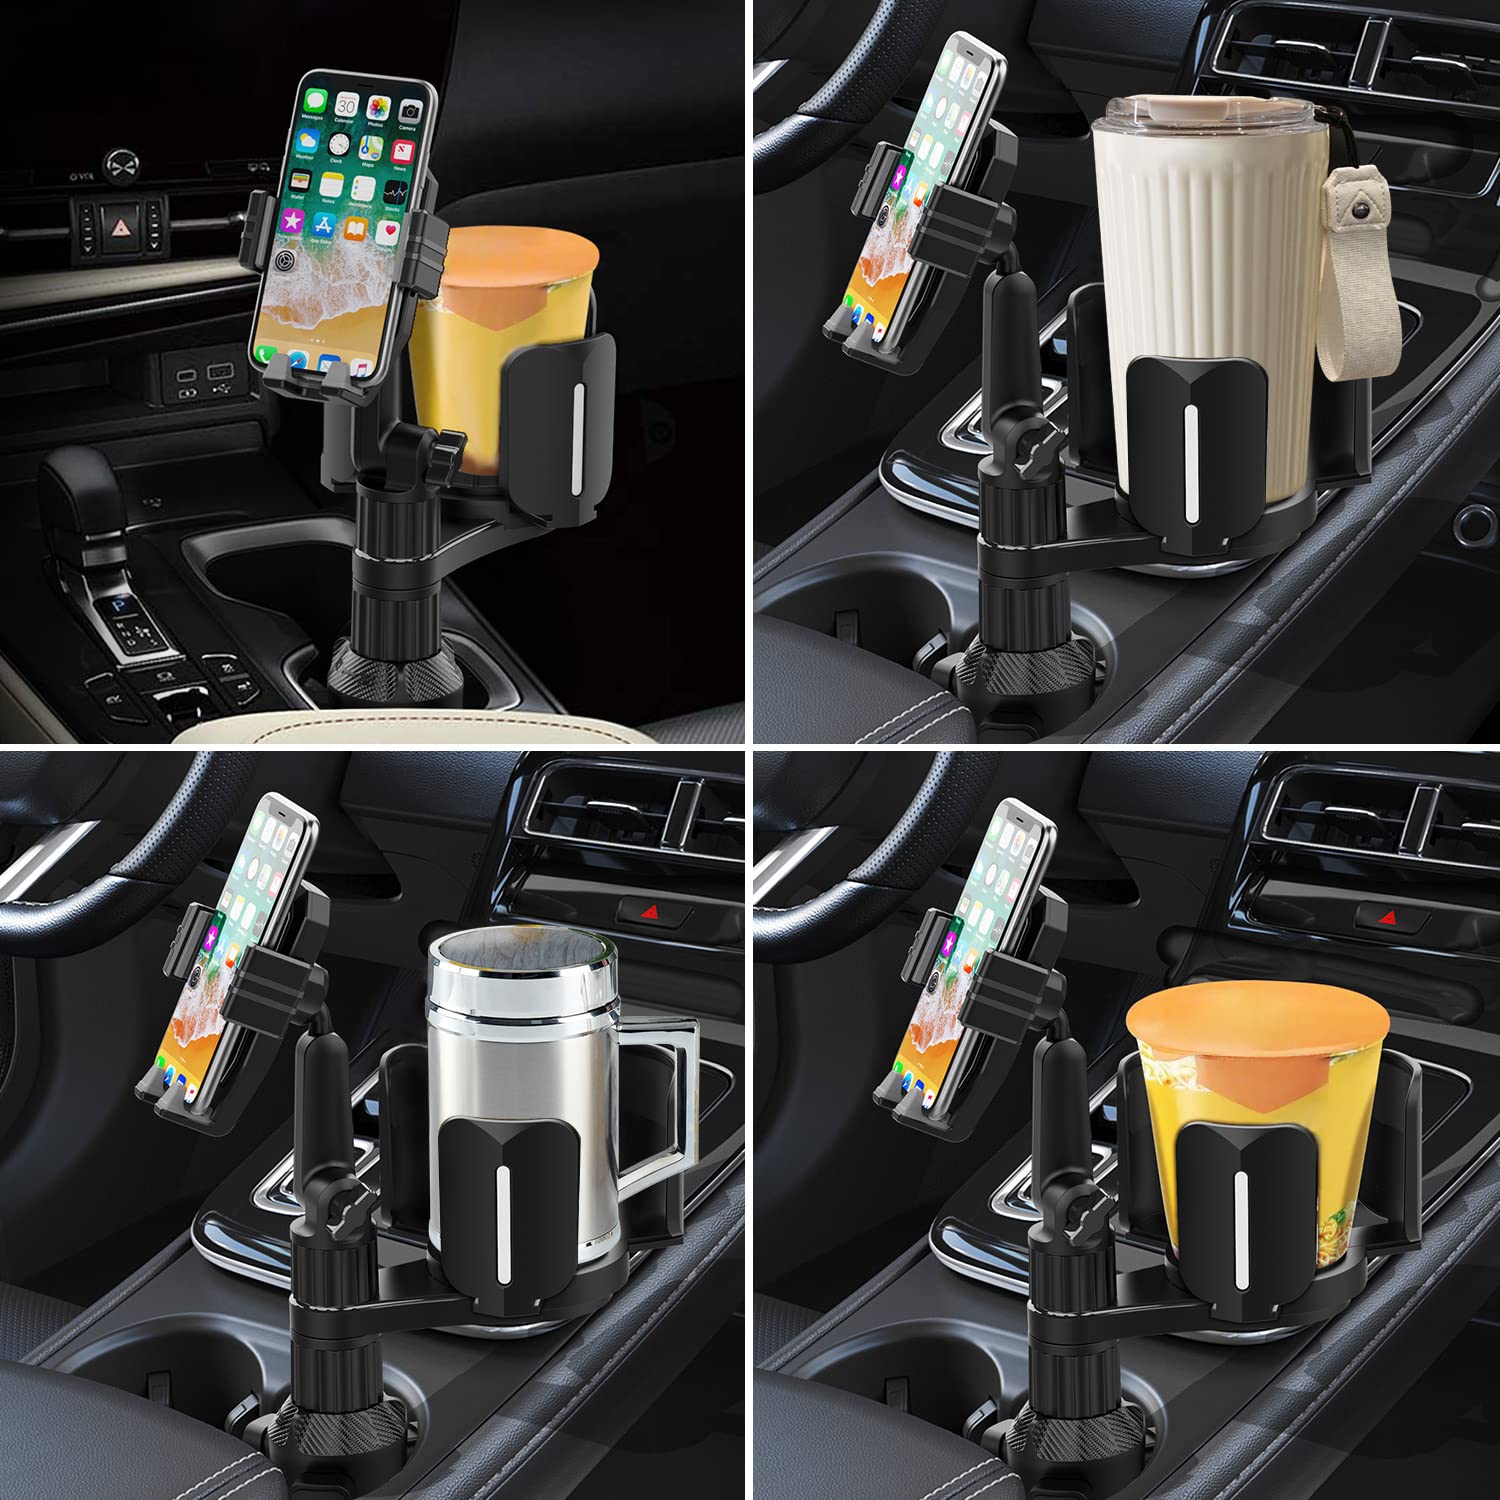 HUMBEST Cup Holder Phone Mount for car ， Phone Mount for car - 360° Rotation Cell Phone Holder car Compatible All Smartphones - Cup Holder Extender for a More Convenient Driving Experience